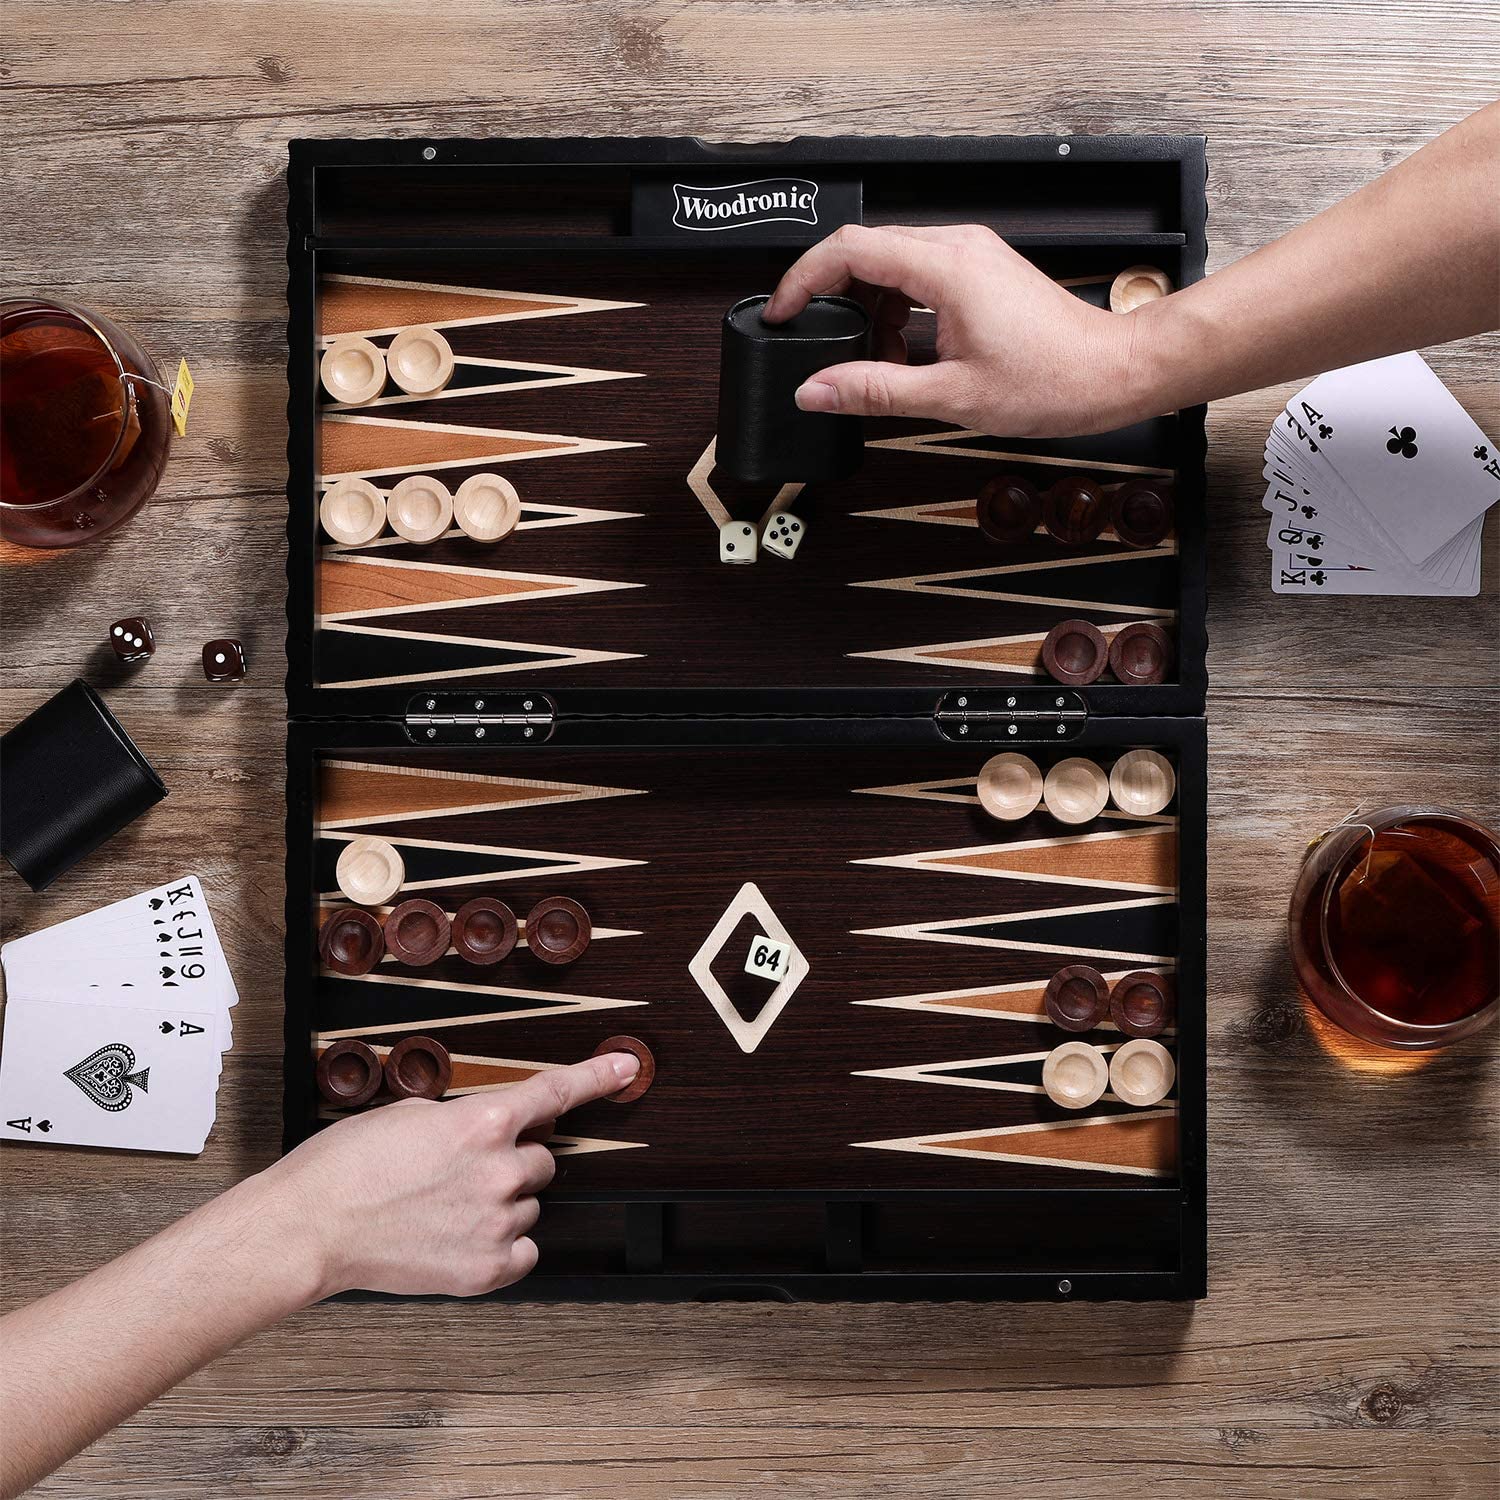 Top 10 Best Backgammon Sets in 2022 Reviews Guide